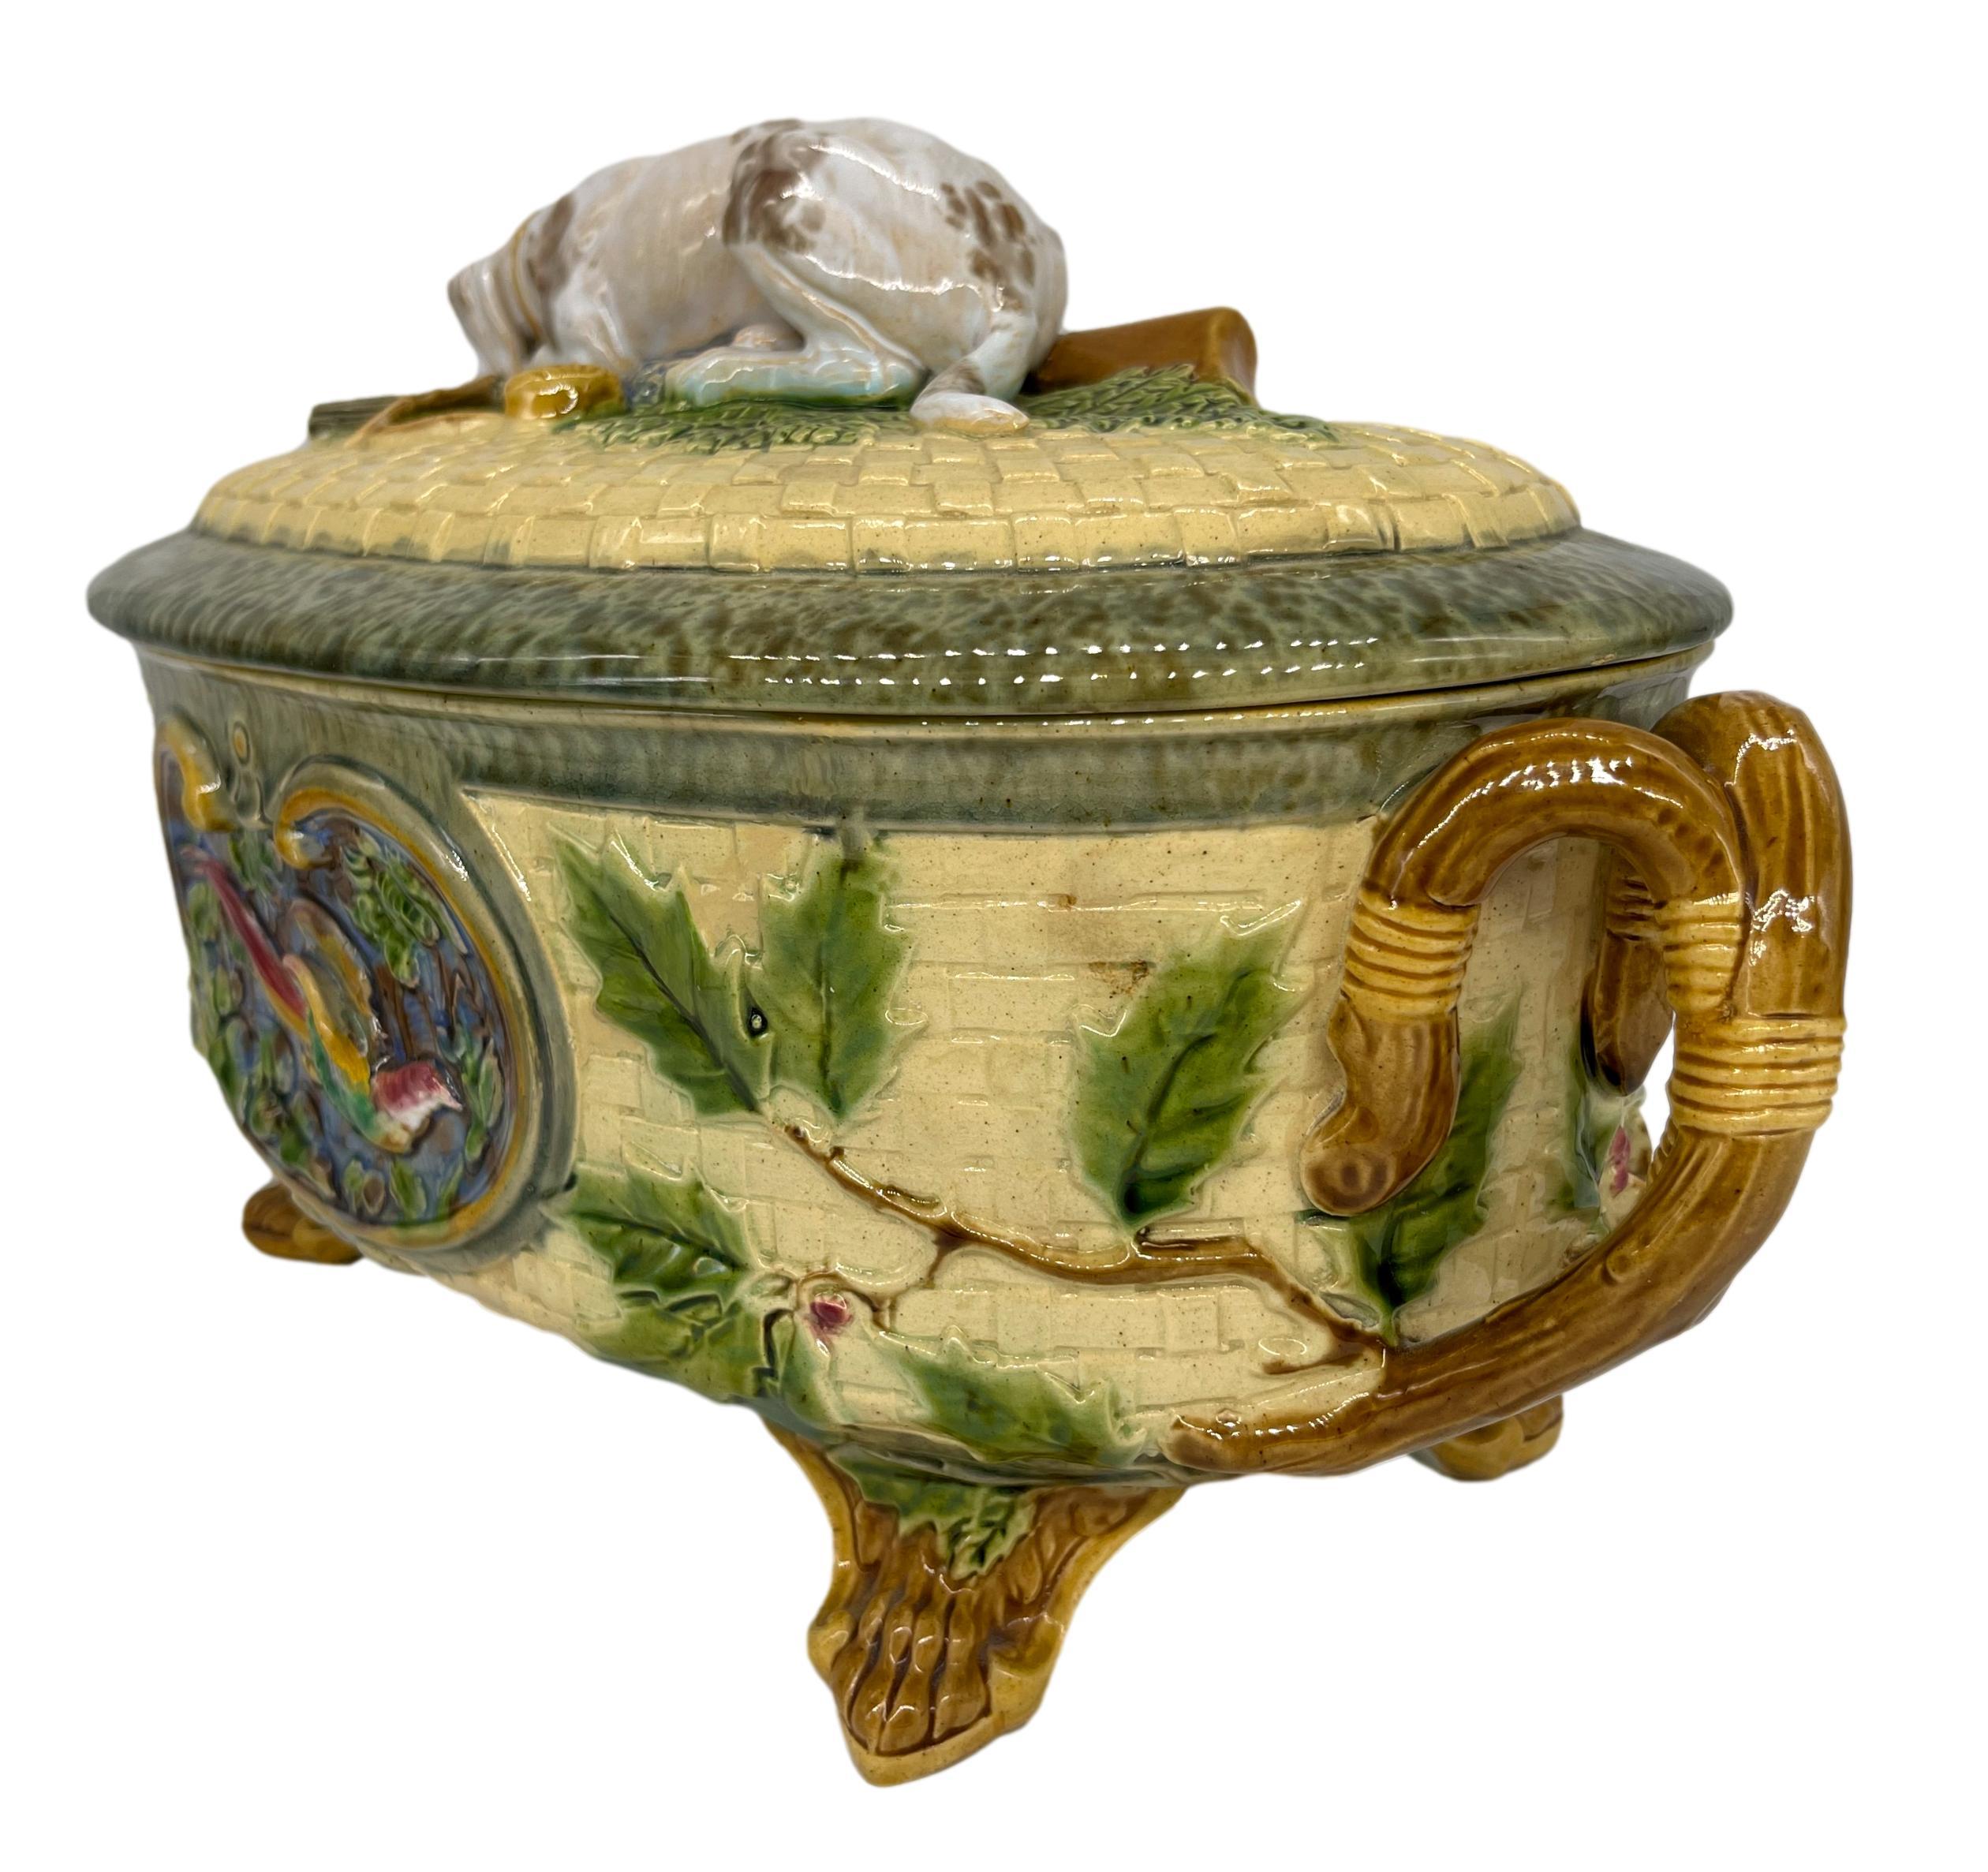 19th Century Minton Majolica Game Tureen with Hunting Dog Finial, Dated 1872